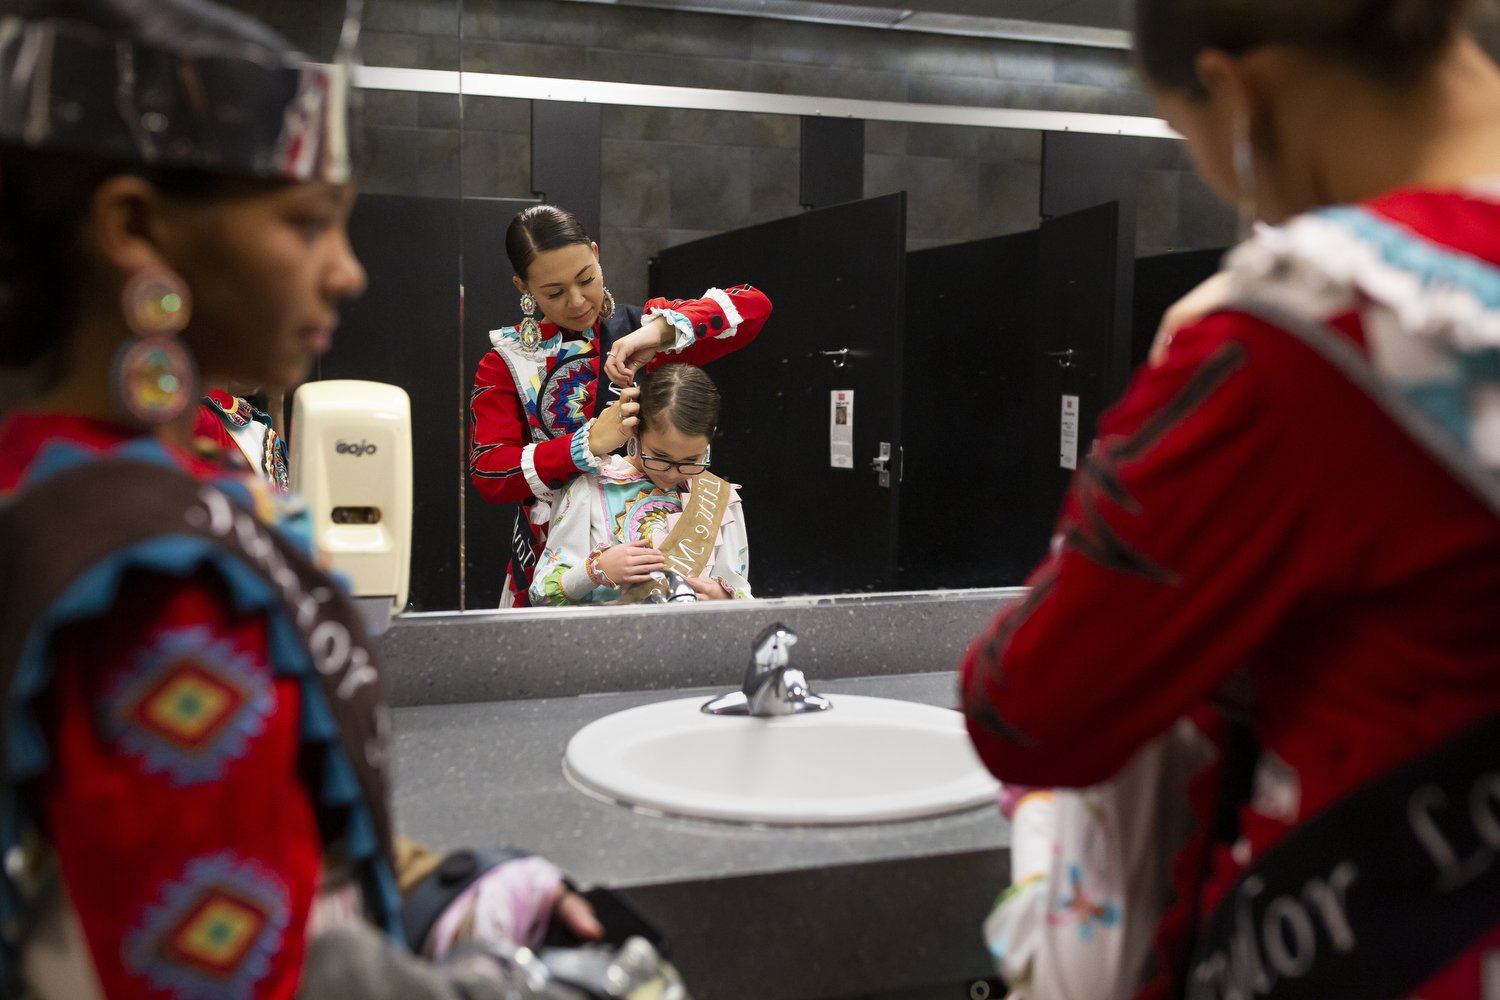  Miss Lumbee Taylor Locklear, center, adjusts Riley Dial’s hair while Kynnady Locklear, left, looks on during the American Indian Heritage Celebration in Raleigh. Despite being one of the largest tribes in the eastern United States, the Lumbee Tribe 